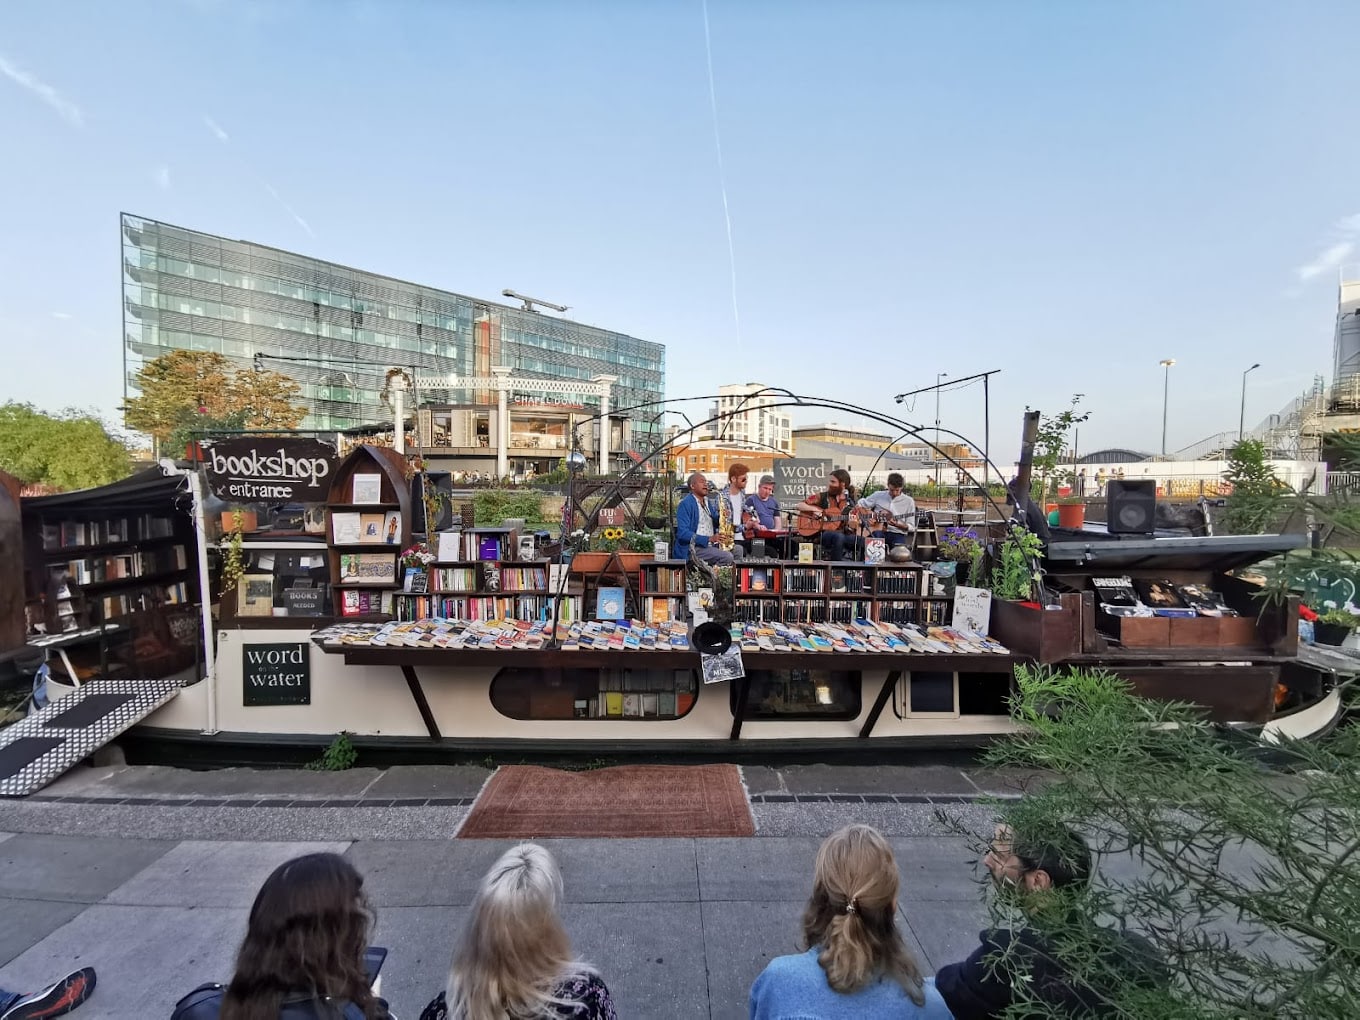 A book barge on Regent's Canal with books on display and musicians playing on the deck.